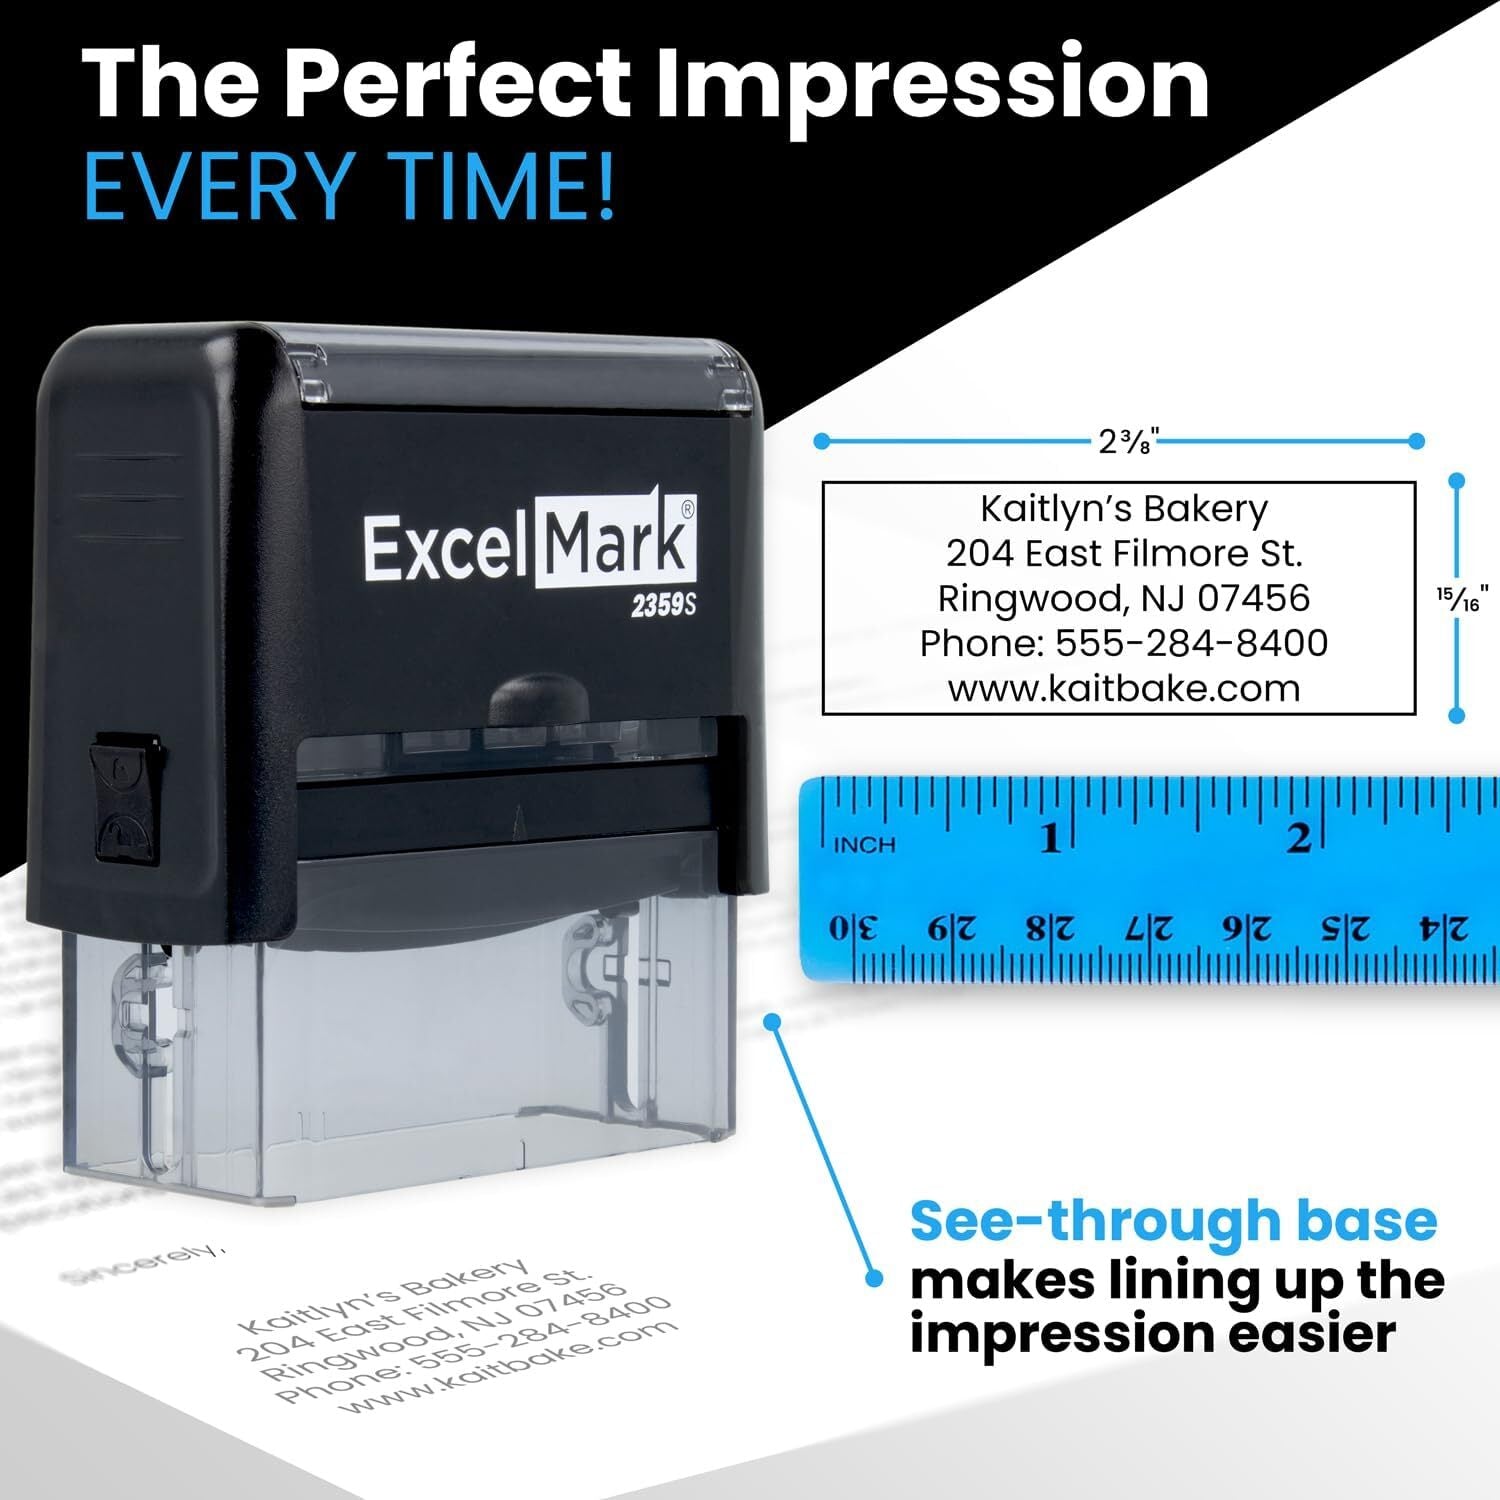 Custom Address Stamp - 20 Font Options - 3 Line Self-Inking Address Stamp -  Up to 3 Lines of Customized Text | Multiple Ink Color Options (Medium)